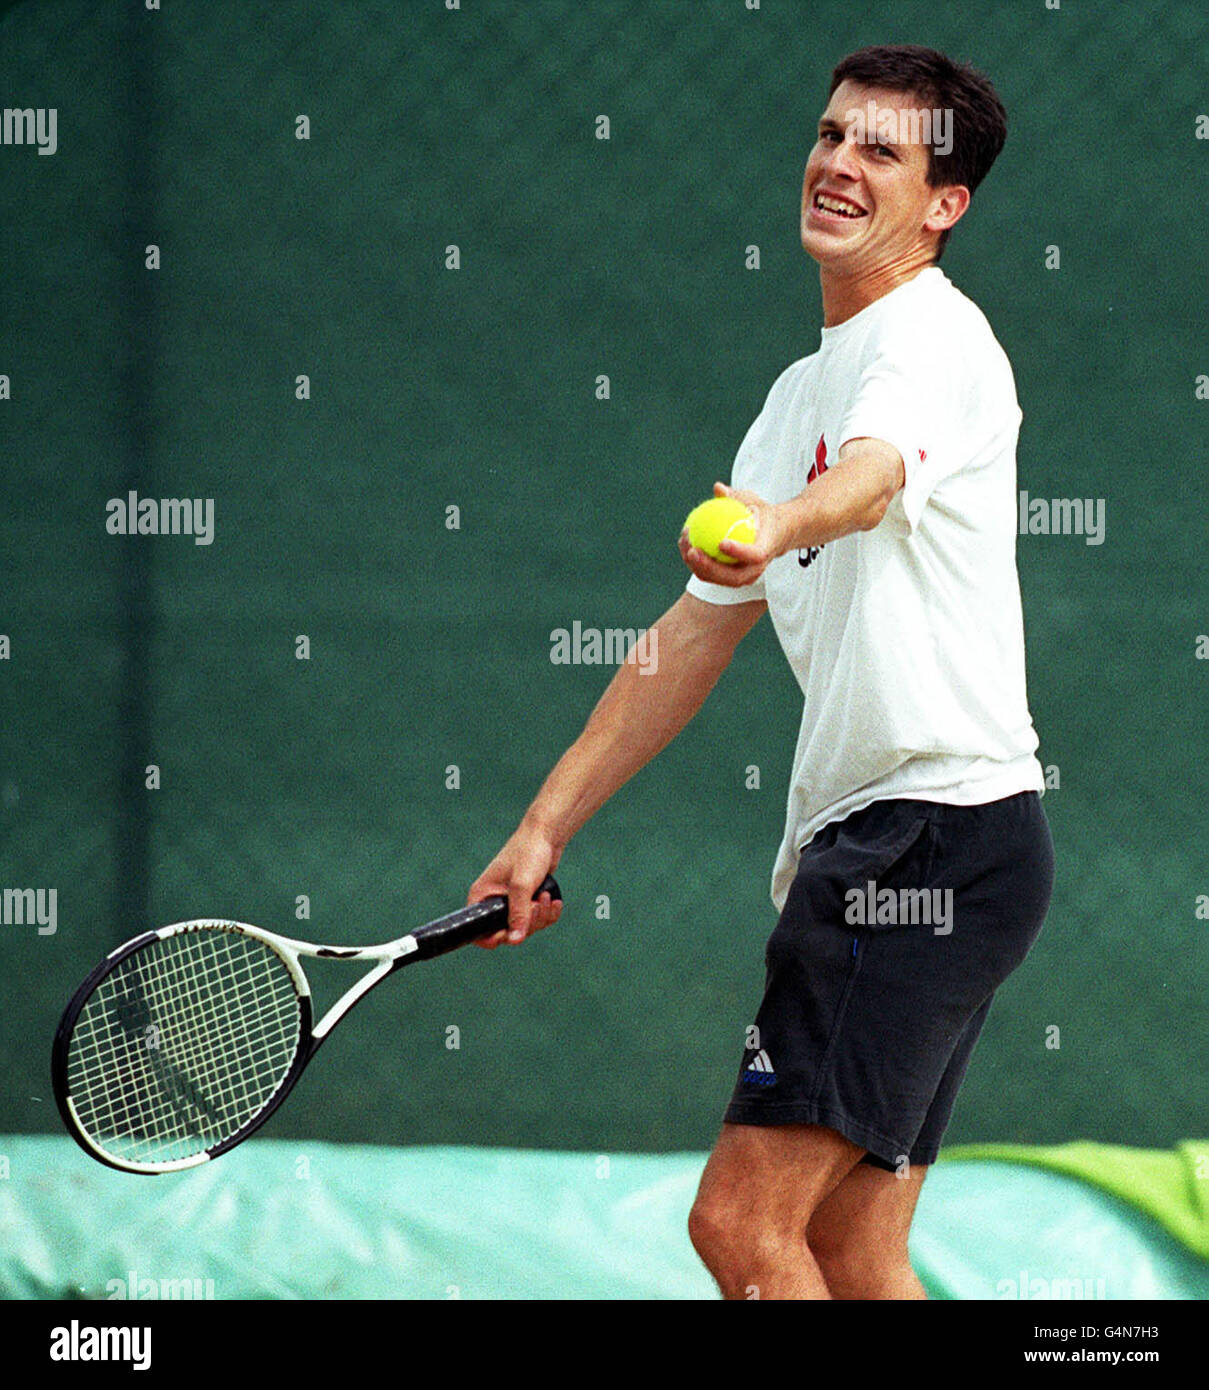 No Commercial Use: British tennis star Tim Henman in action during a practice session at the Wimbledon Tennis Championships. Henman is due to finish his match against Jim Courier. Stock Photo